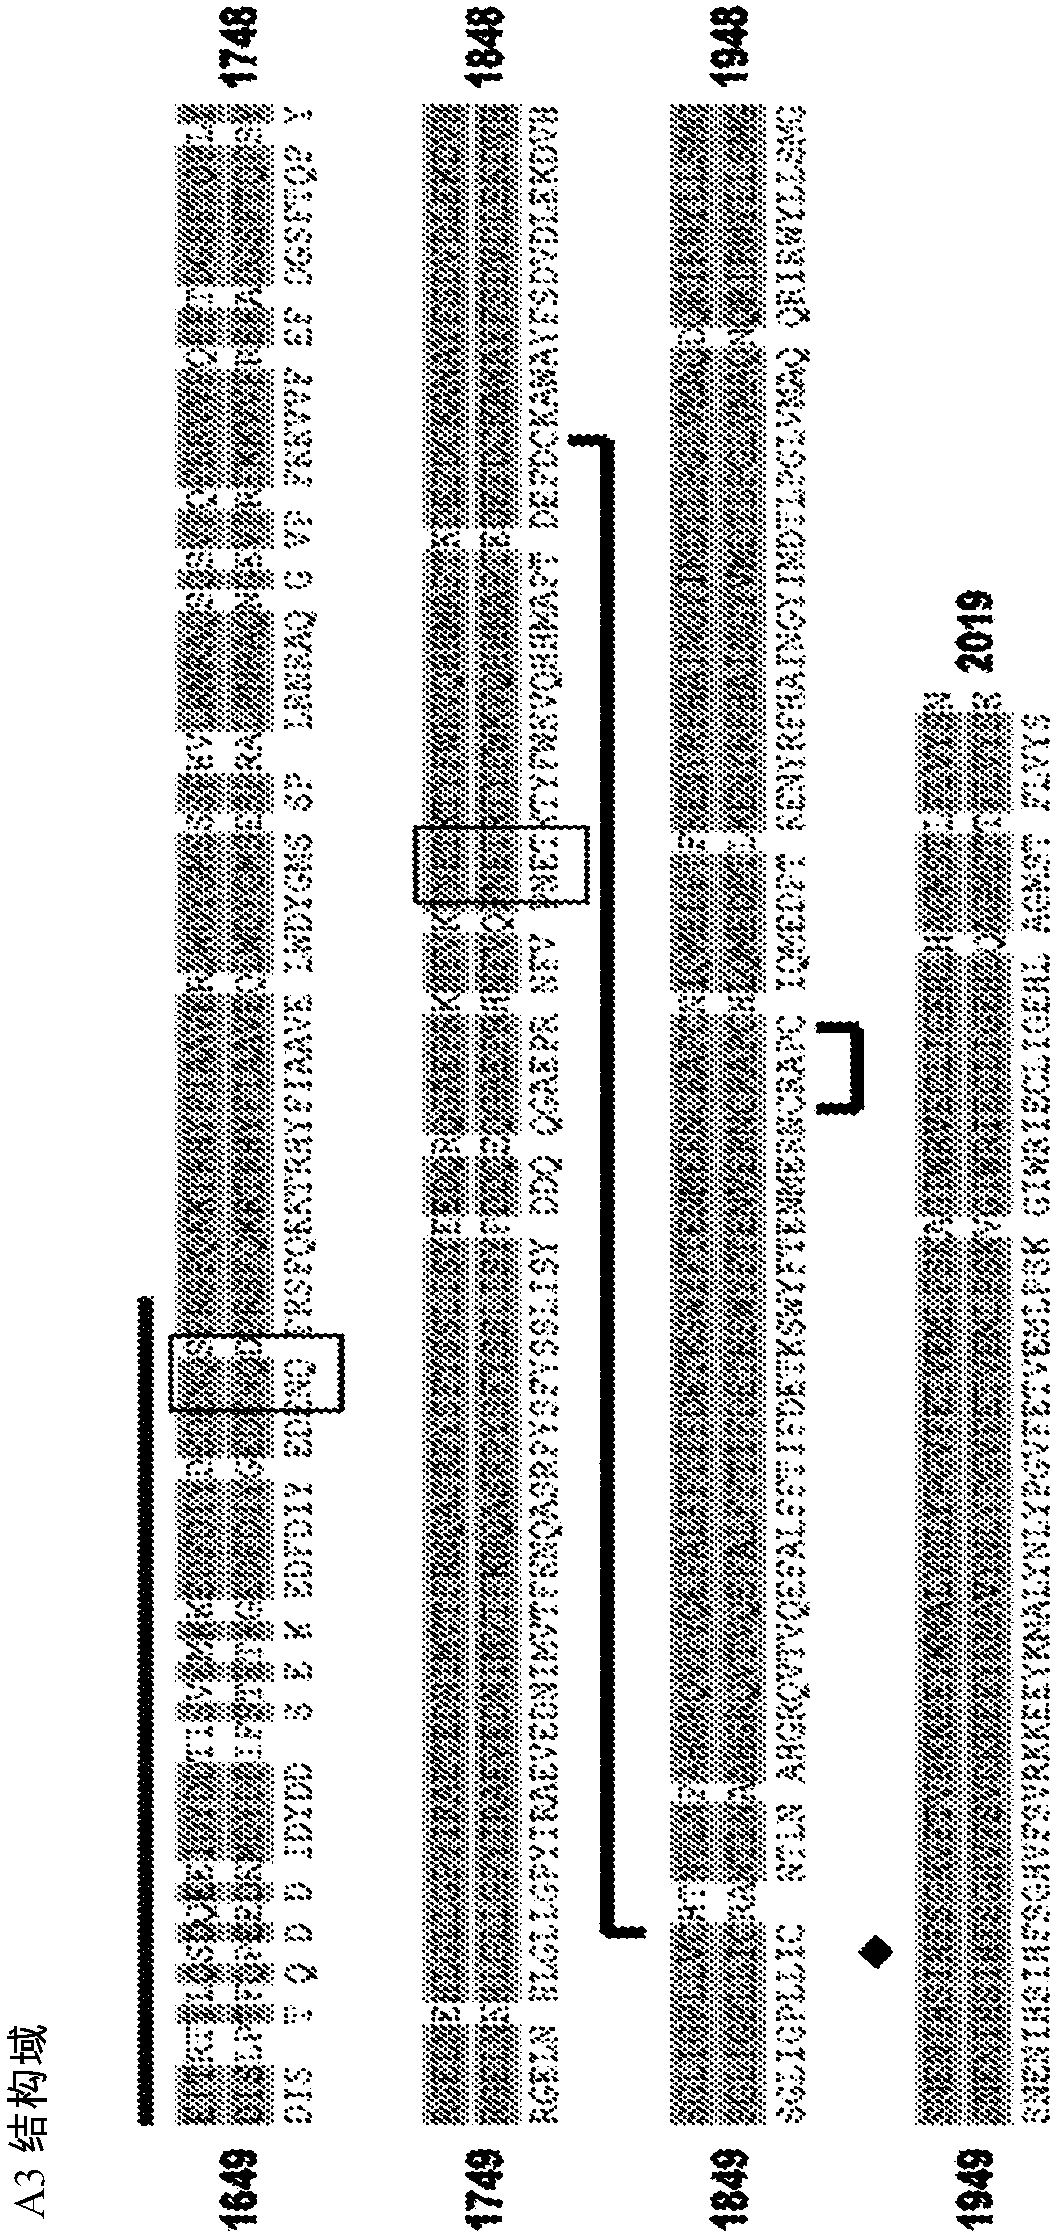 Recombinant promoters and vectors for protein expression in liver and use thereof